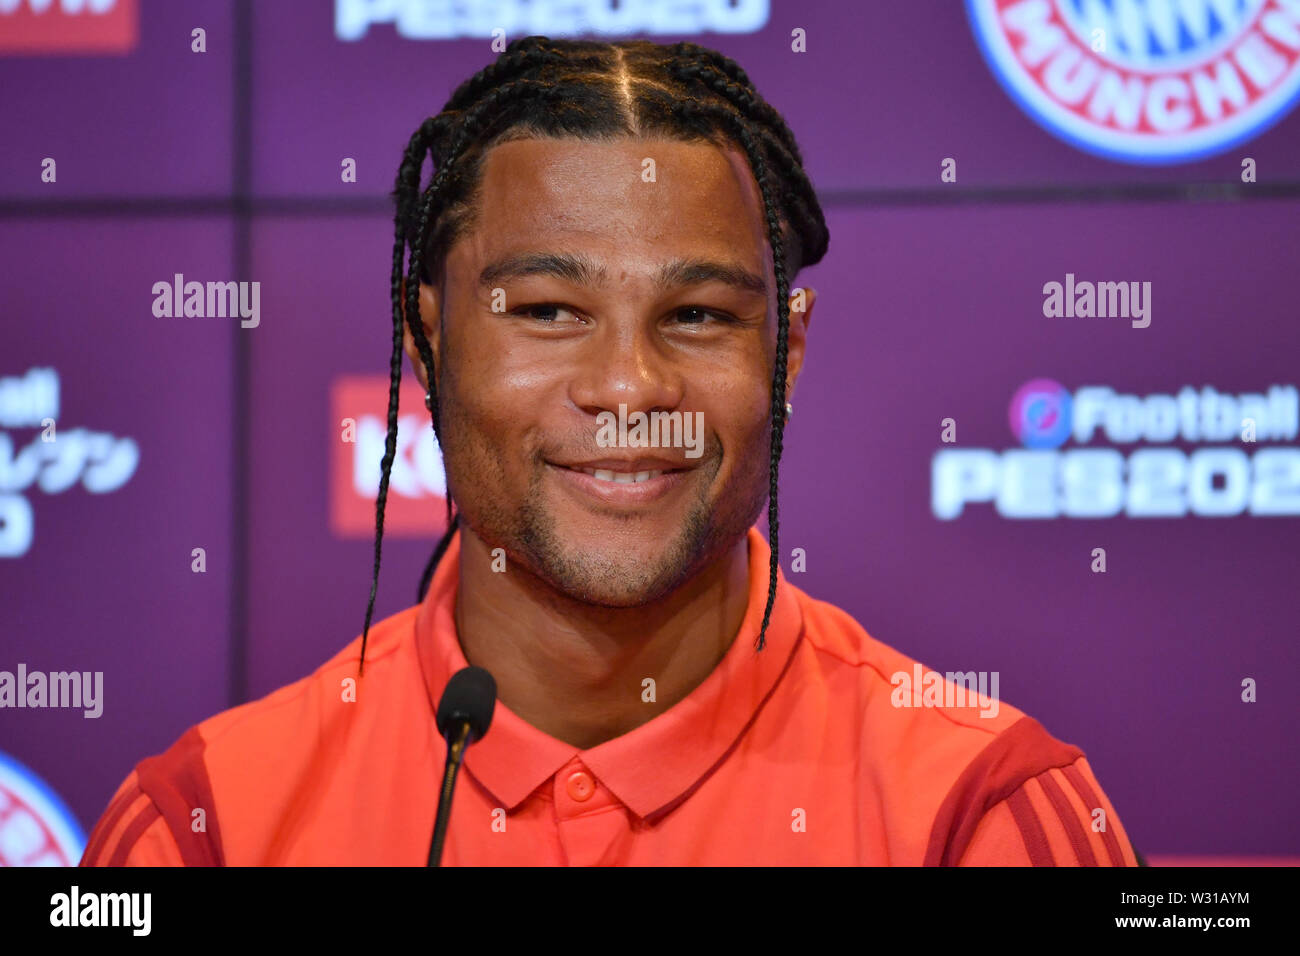 Bayern Munich Ea Sports High Resolution Stock Photography And Images Alamy